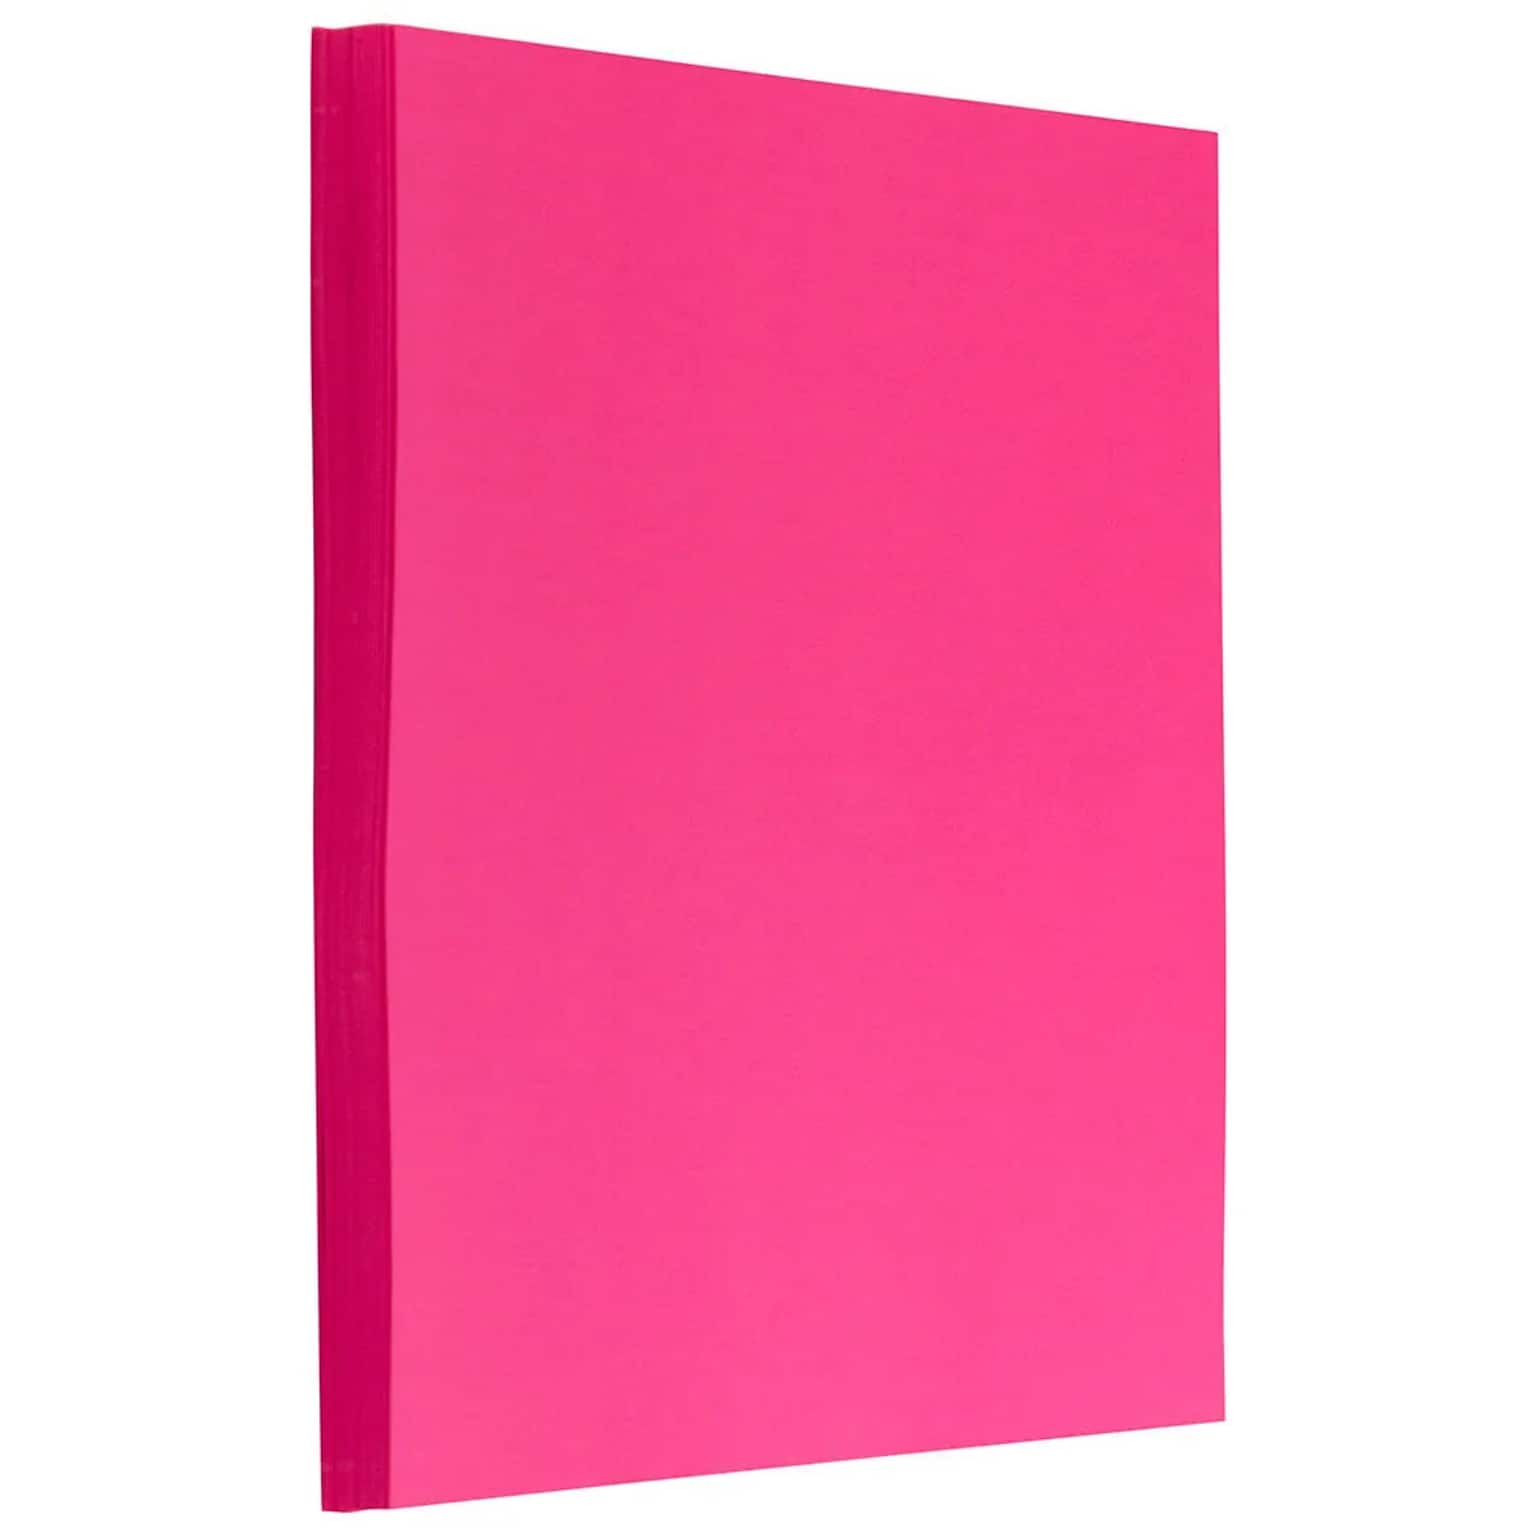 JAM Paper 30% Recycled 8.5 x 11 Colored Paper, 24 lbs., Ultra Fuchsia Pink, 200 Sheets/Pack (184931G)